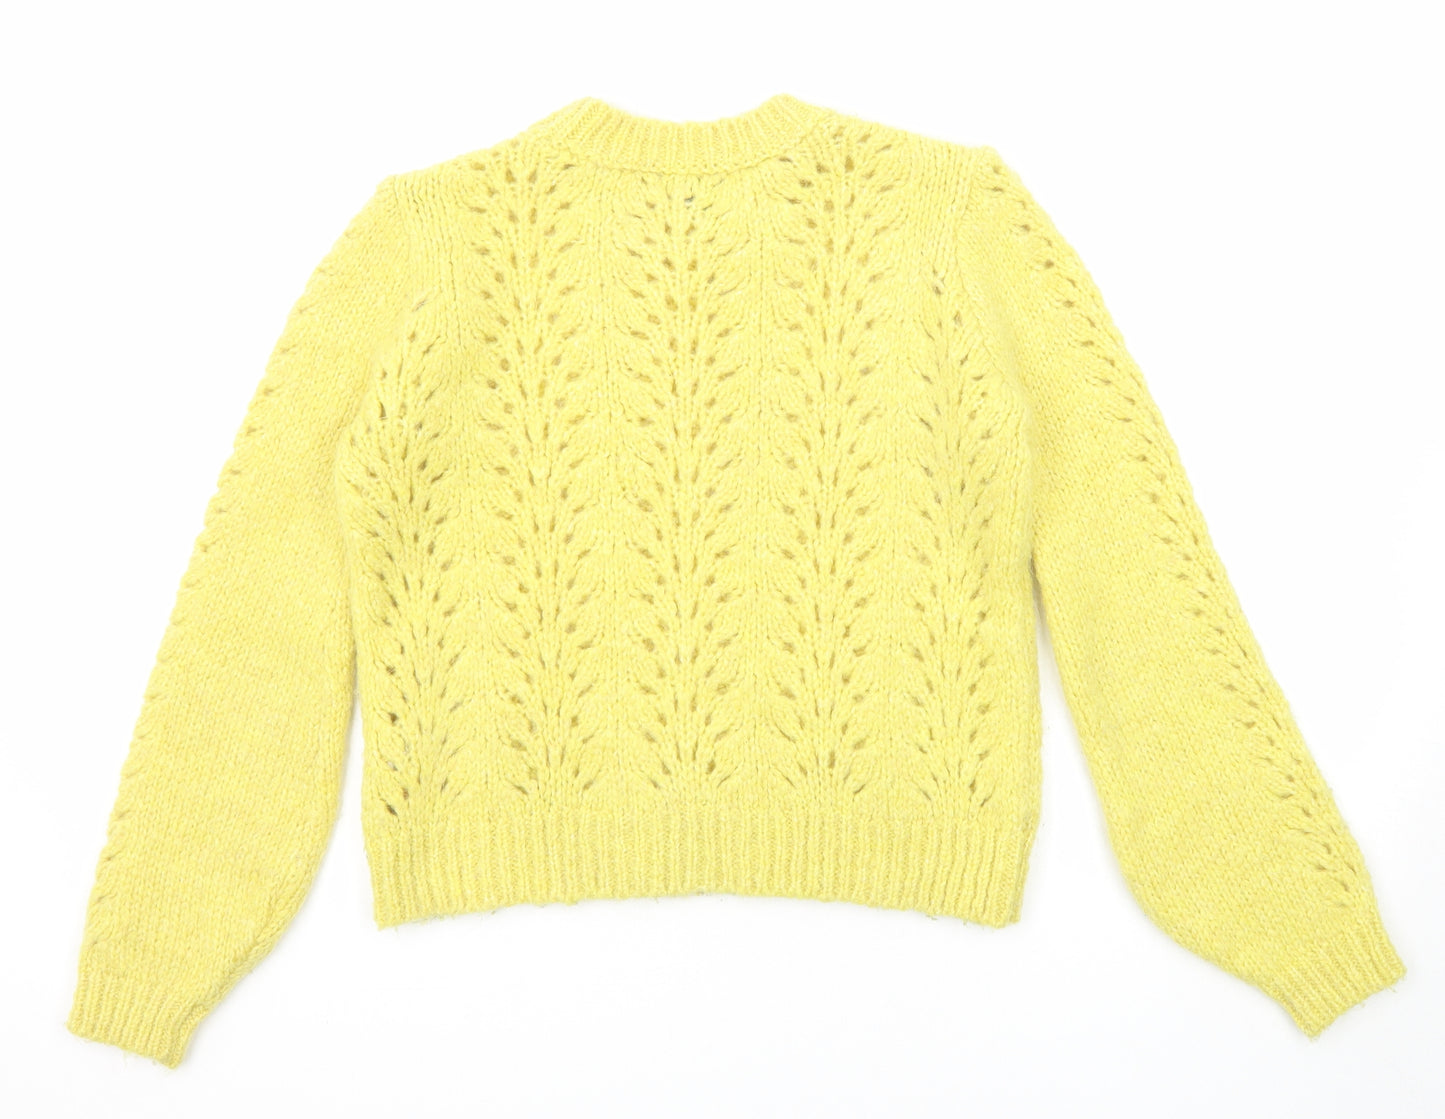 Topshop Womens Yellow Mock Neck Acrylic Pullover Jumper Size 6